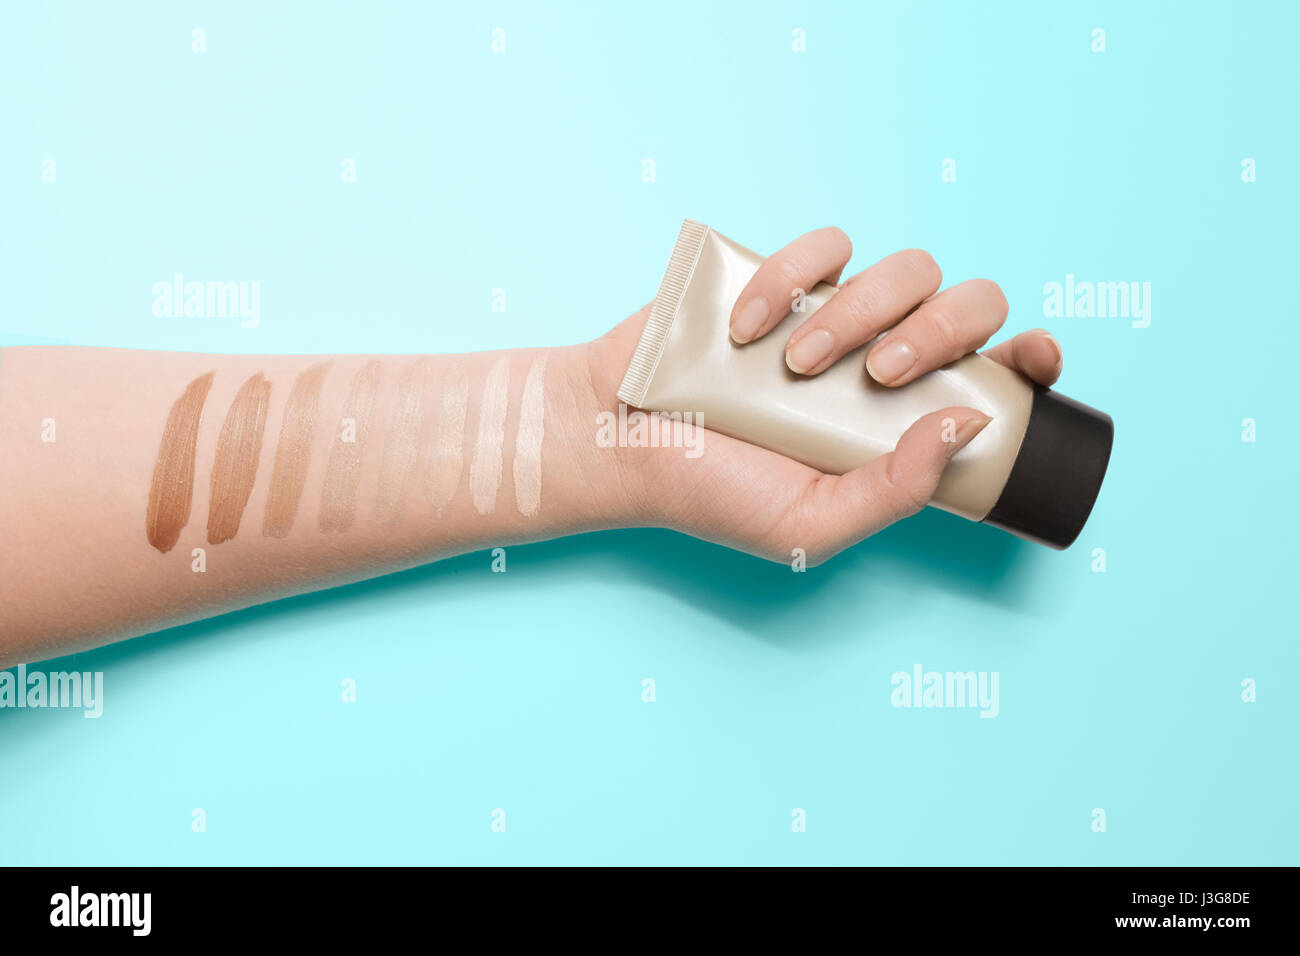 Foundation swatches on the hand holding makeup tube Stock Photo